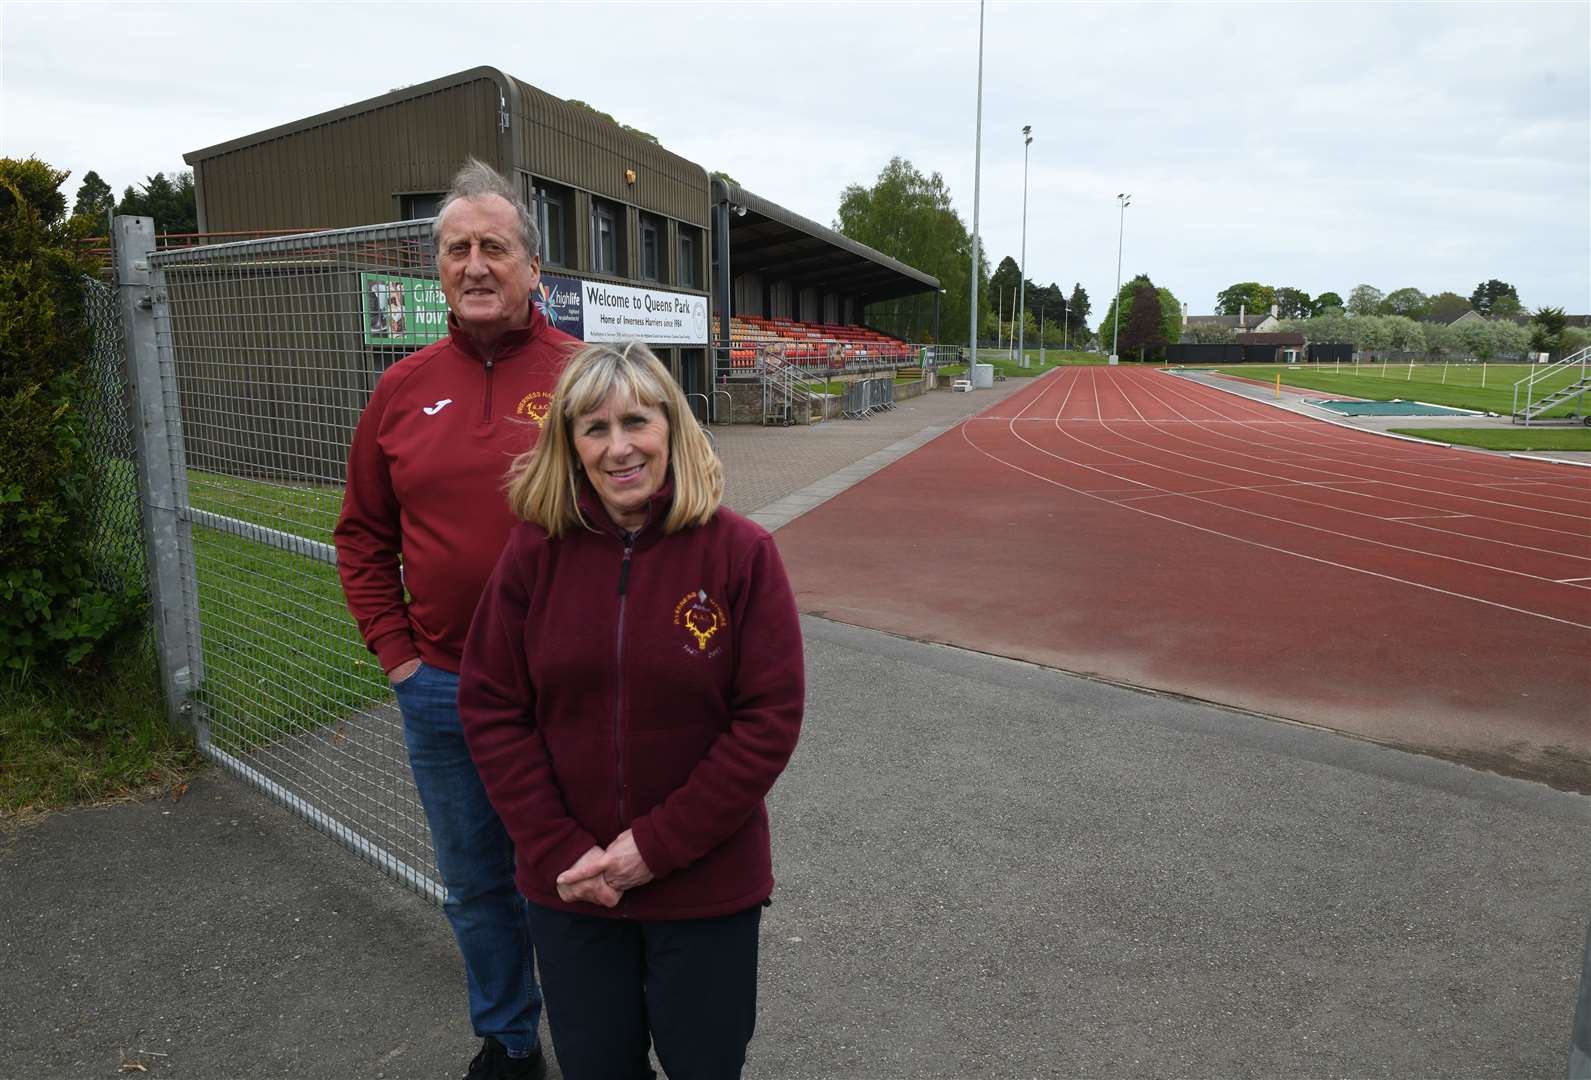 Inverness Harriers president Charlie Forbes and Inverness Harriers Club secretary Dianne Chisholm pictured at the Queen’s Park Stadium where a survey has ruled that the venue may not be fit to host competitions from as early as next year. Picture: James Mackenzie